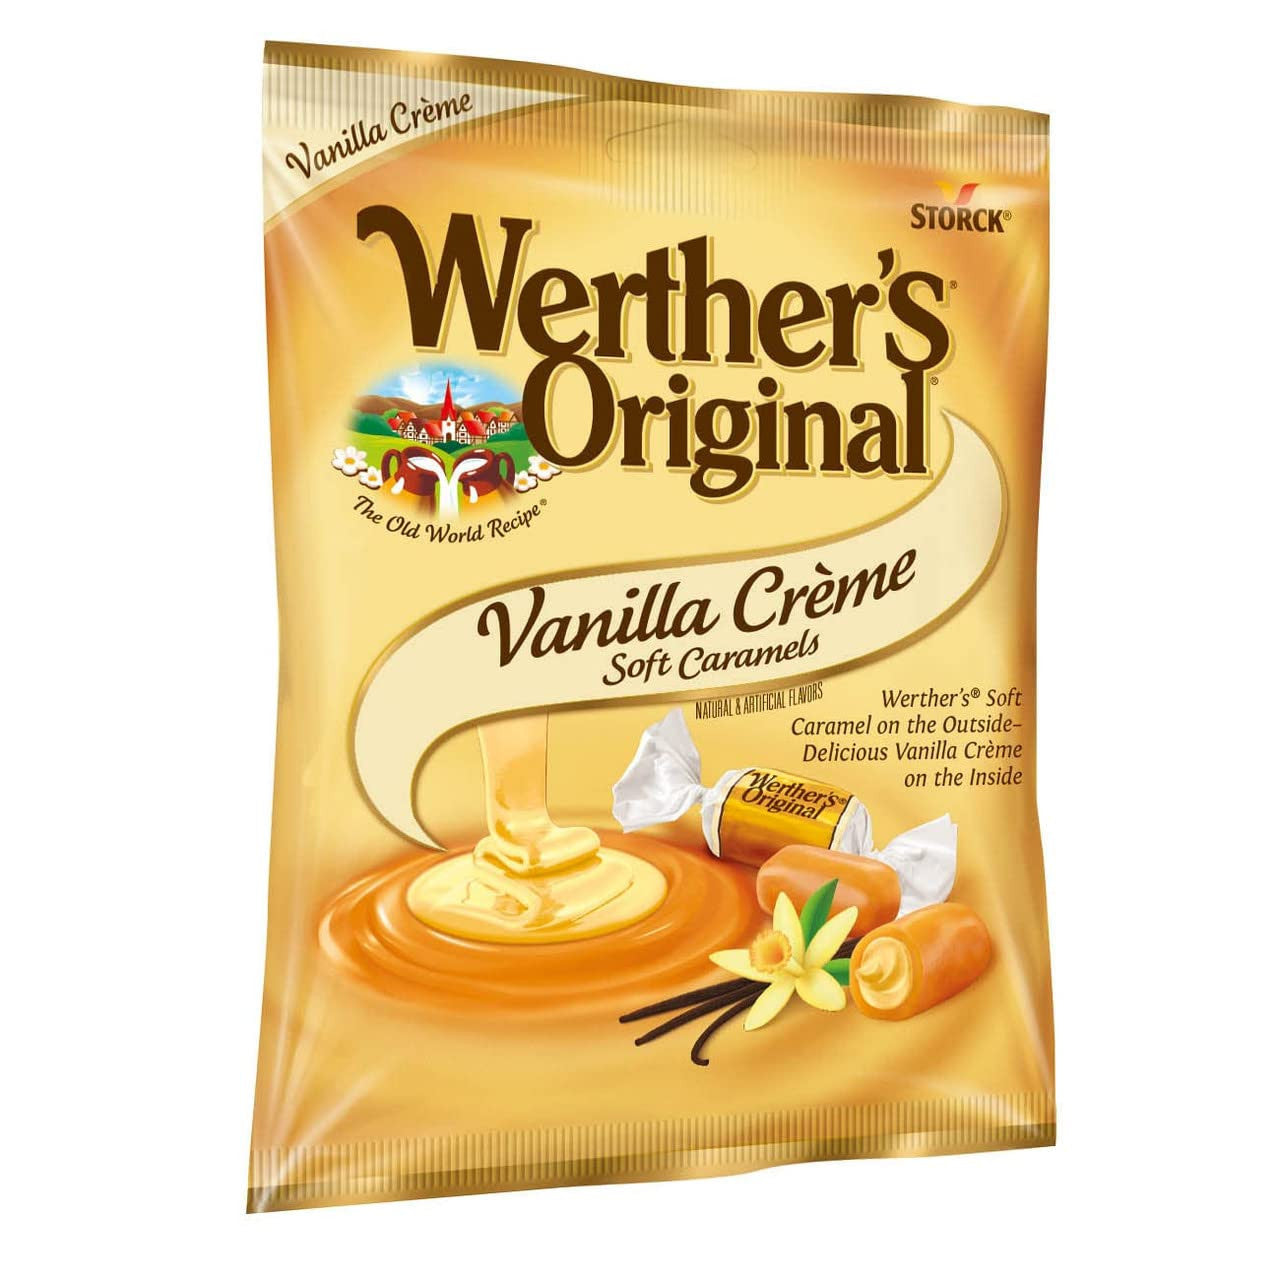 Werther's Original Soft Vanilla Eclair Caramel Candies, 116g/4.1 oz., Bag {Imported from Canada}